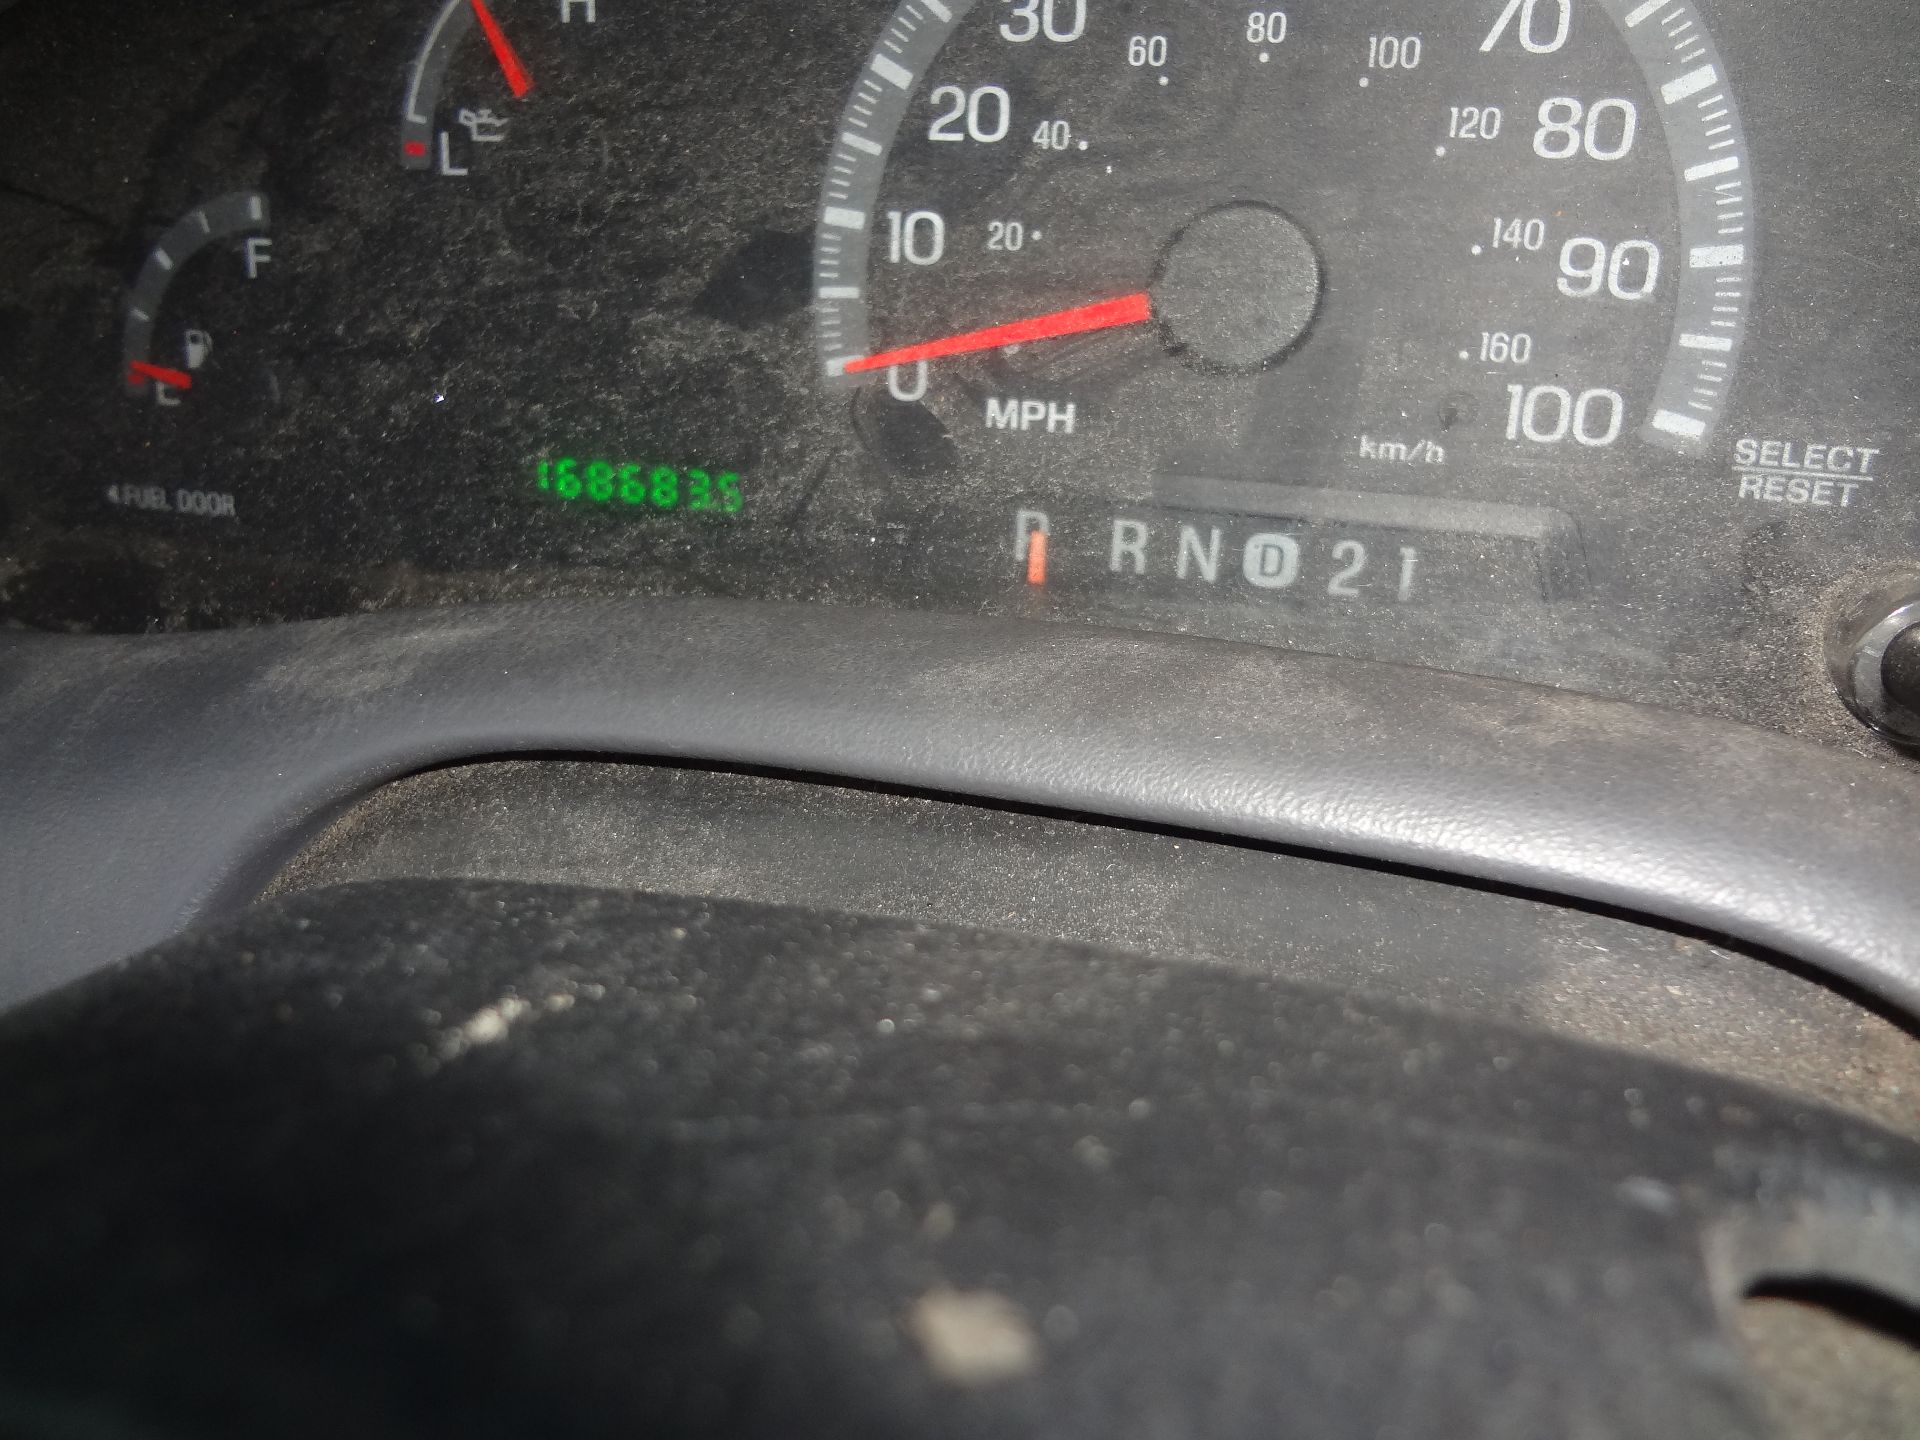 2001 FORD F-150XL 2-DOOR PICKUP TRUCK, APPROXIMATELY 169,000 MILES, VIN: 1FTZF172X1NB38572 - Image 6 of 12